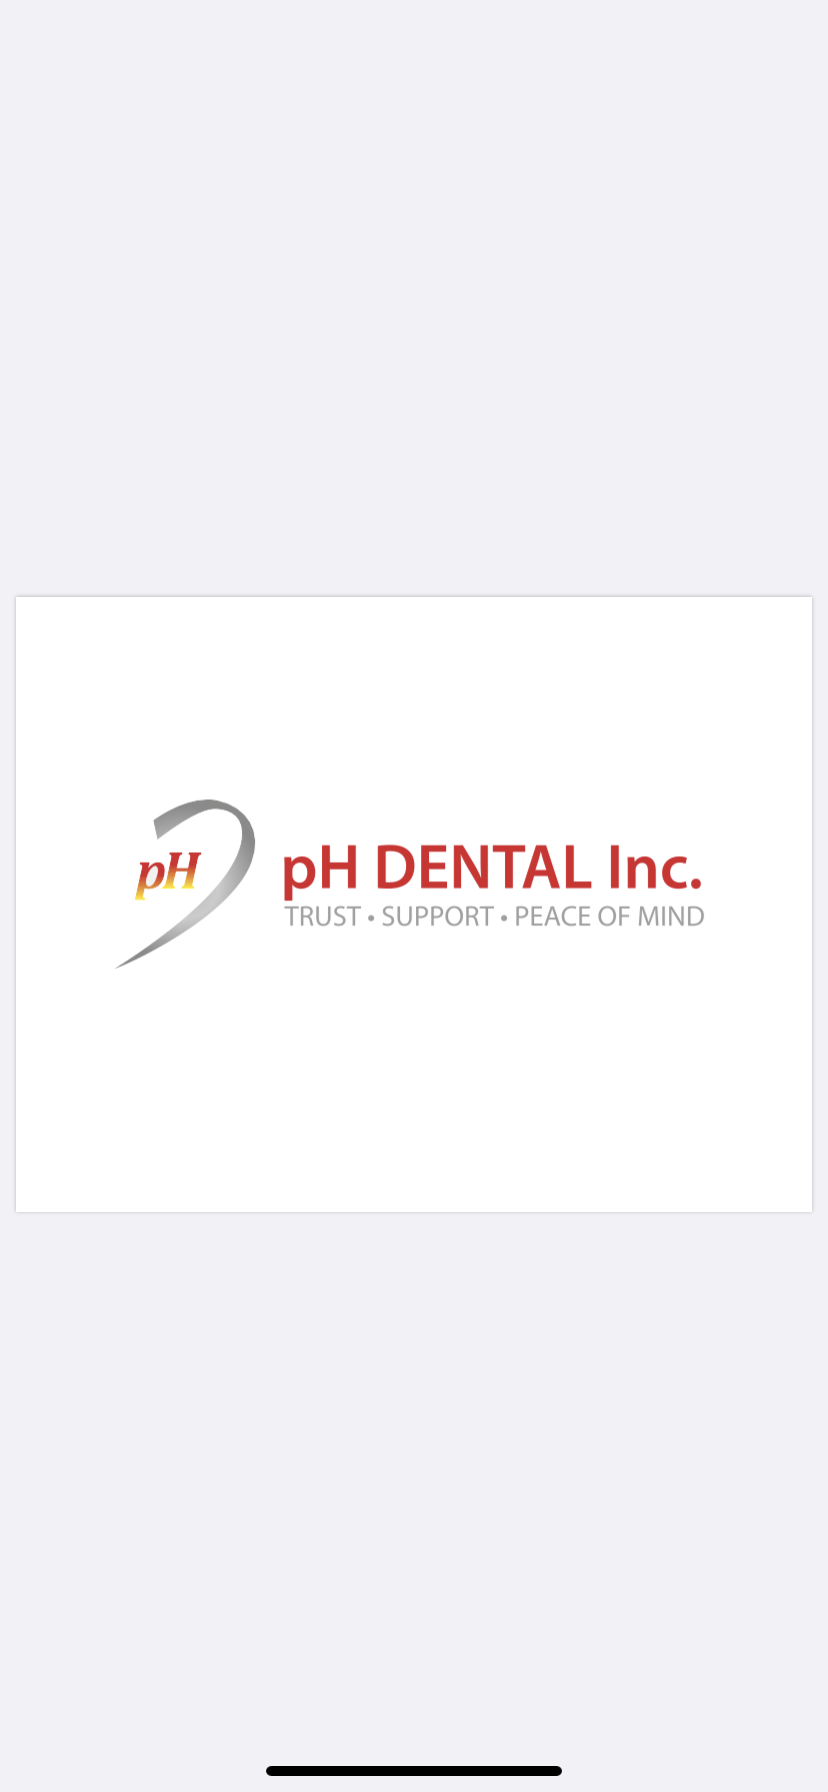 Leading Straumann Group Brand, T-Plus, Signs Agreement With pH Dental, One Of America’s Fastest-Growing Company